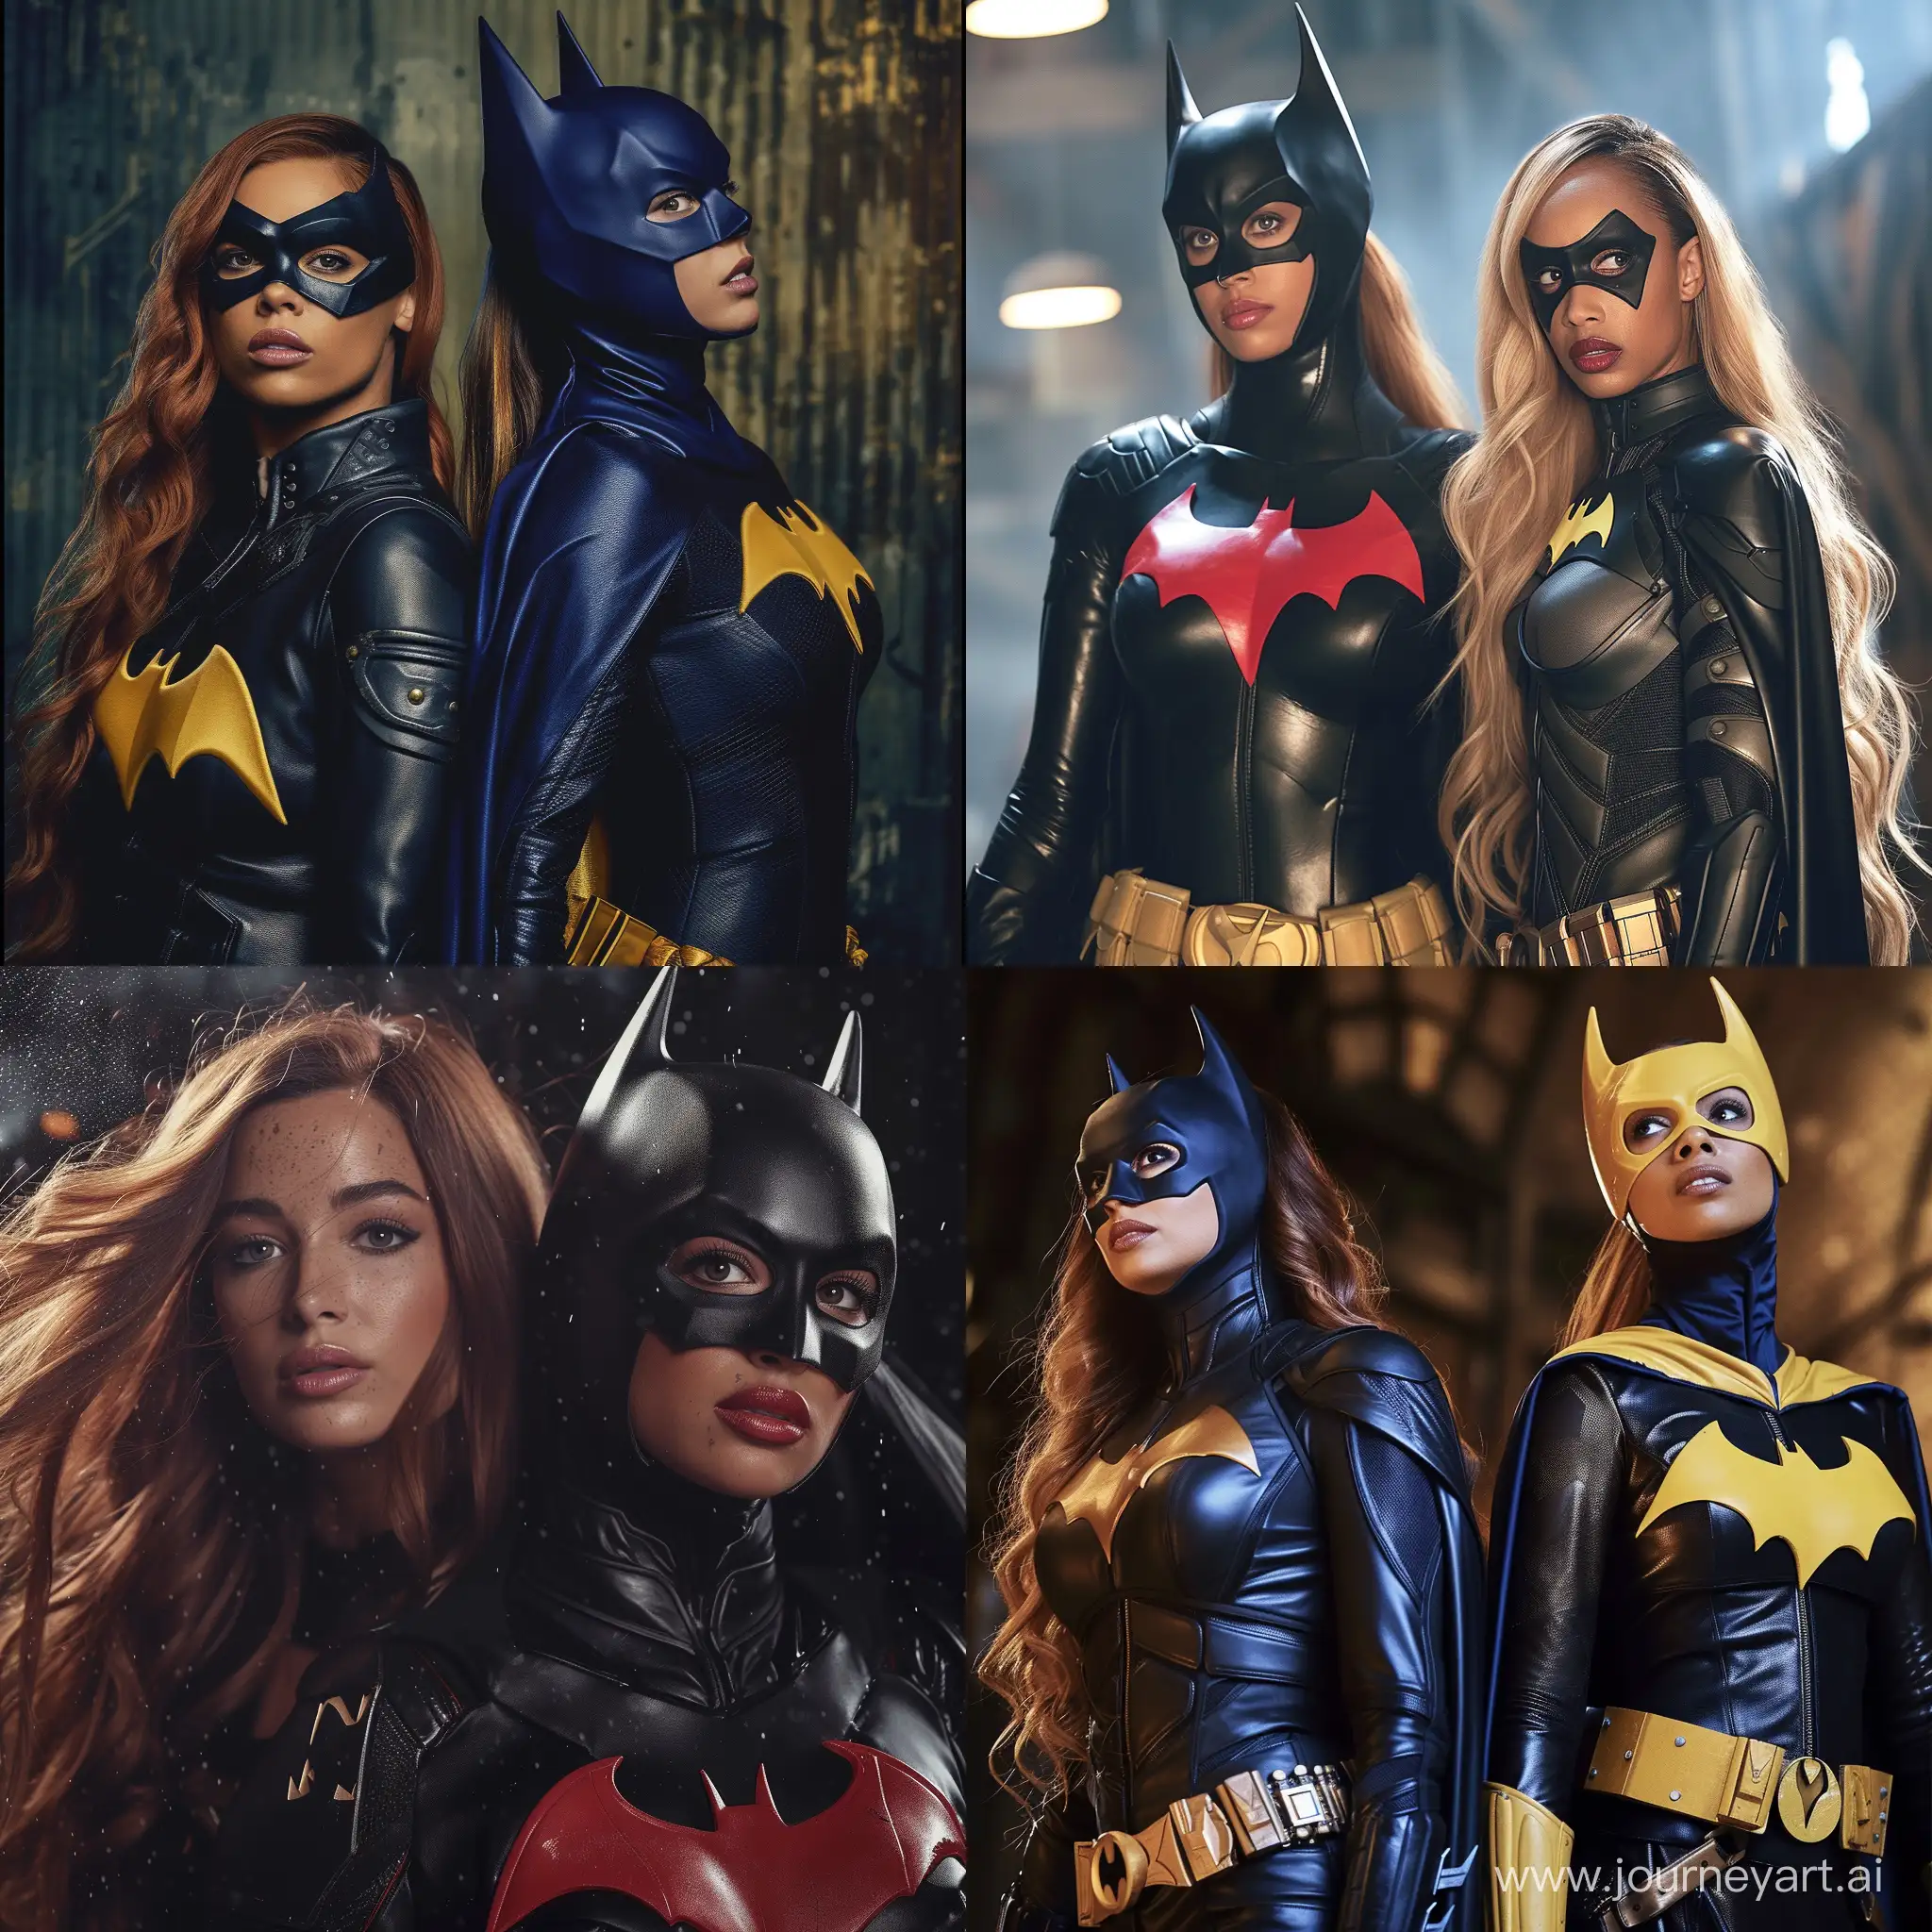 Ashley-Tisdale-and-Erica-Ash-Portray-Batgirl-Duo-in-Dynamic-Pose